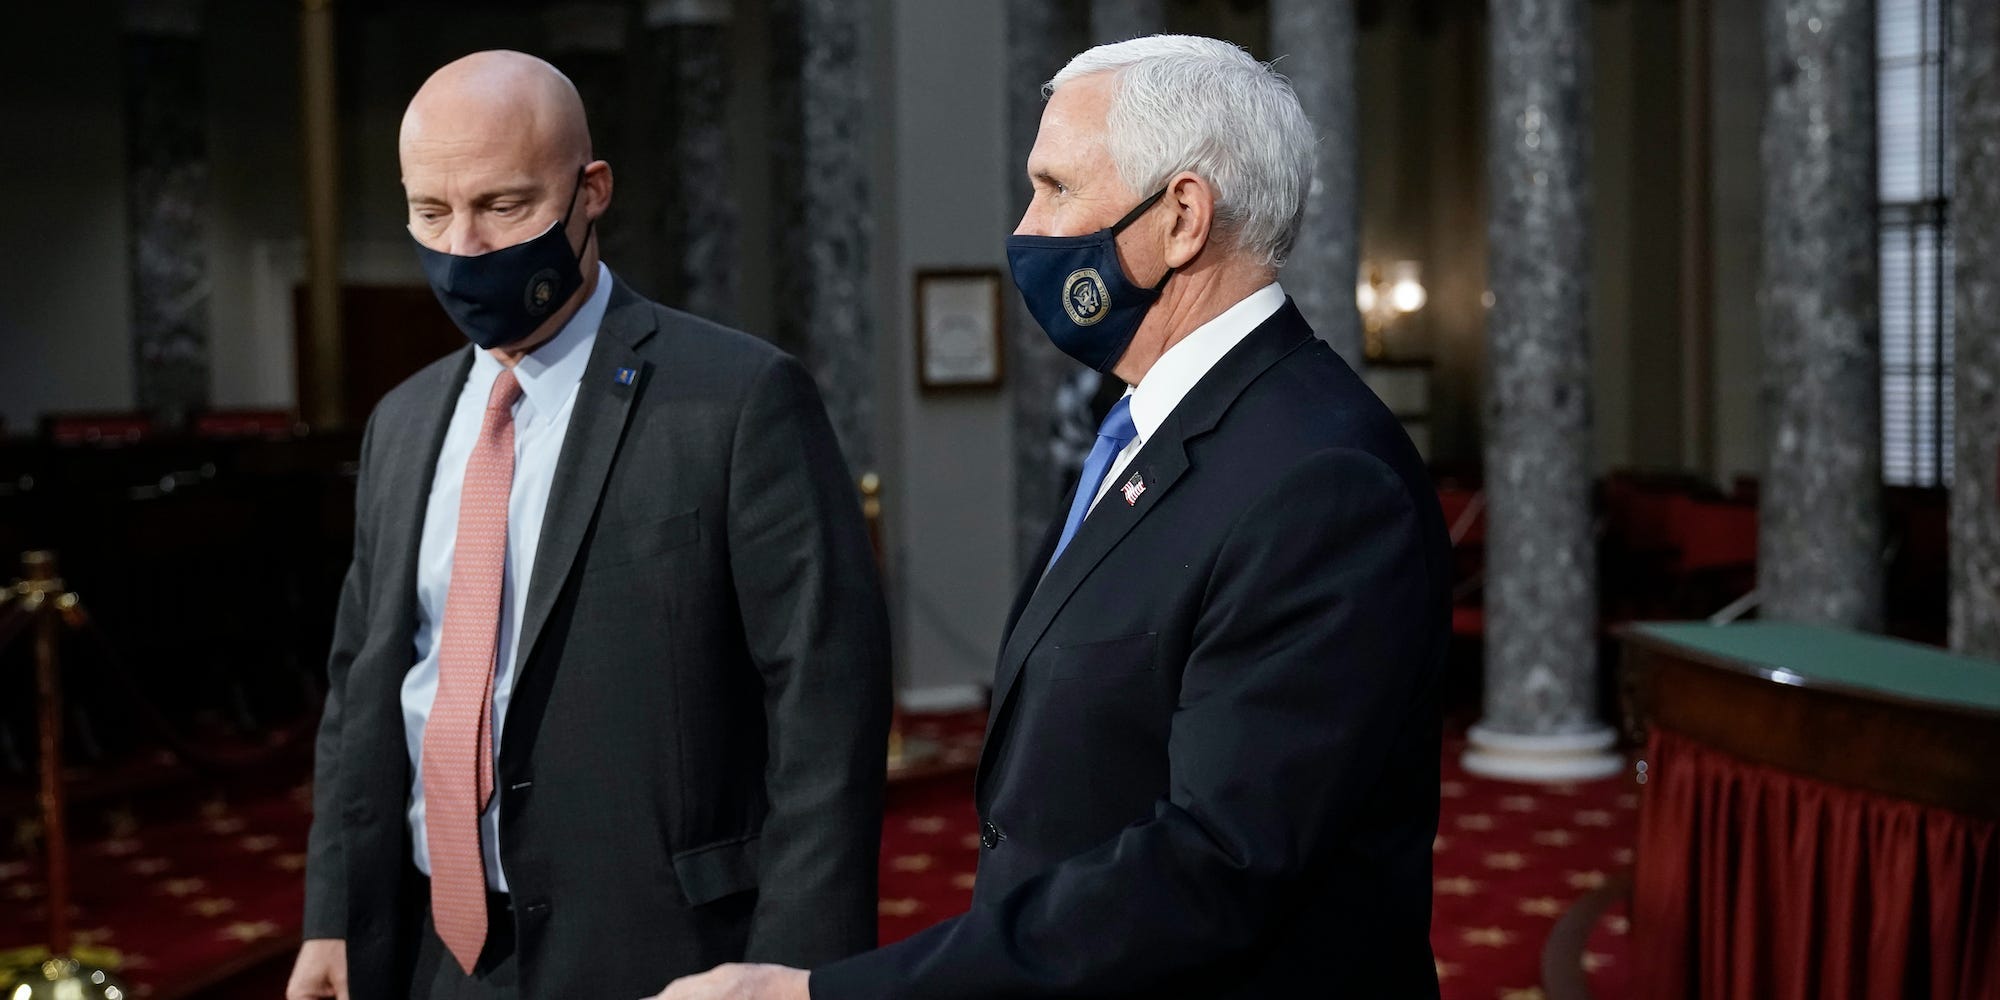 Vice President Mike Pence, joined at left by chief of staff Marc Short, finishes a swearing-in ceremony for senators in the Old Senate Chamber at the Capitol in Washington, Sunday, Jan. 3, 2021.